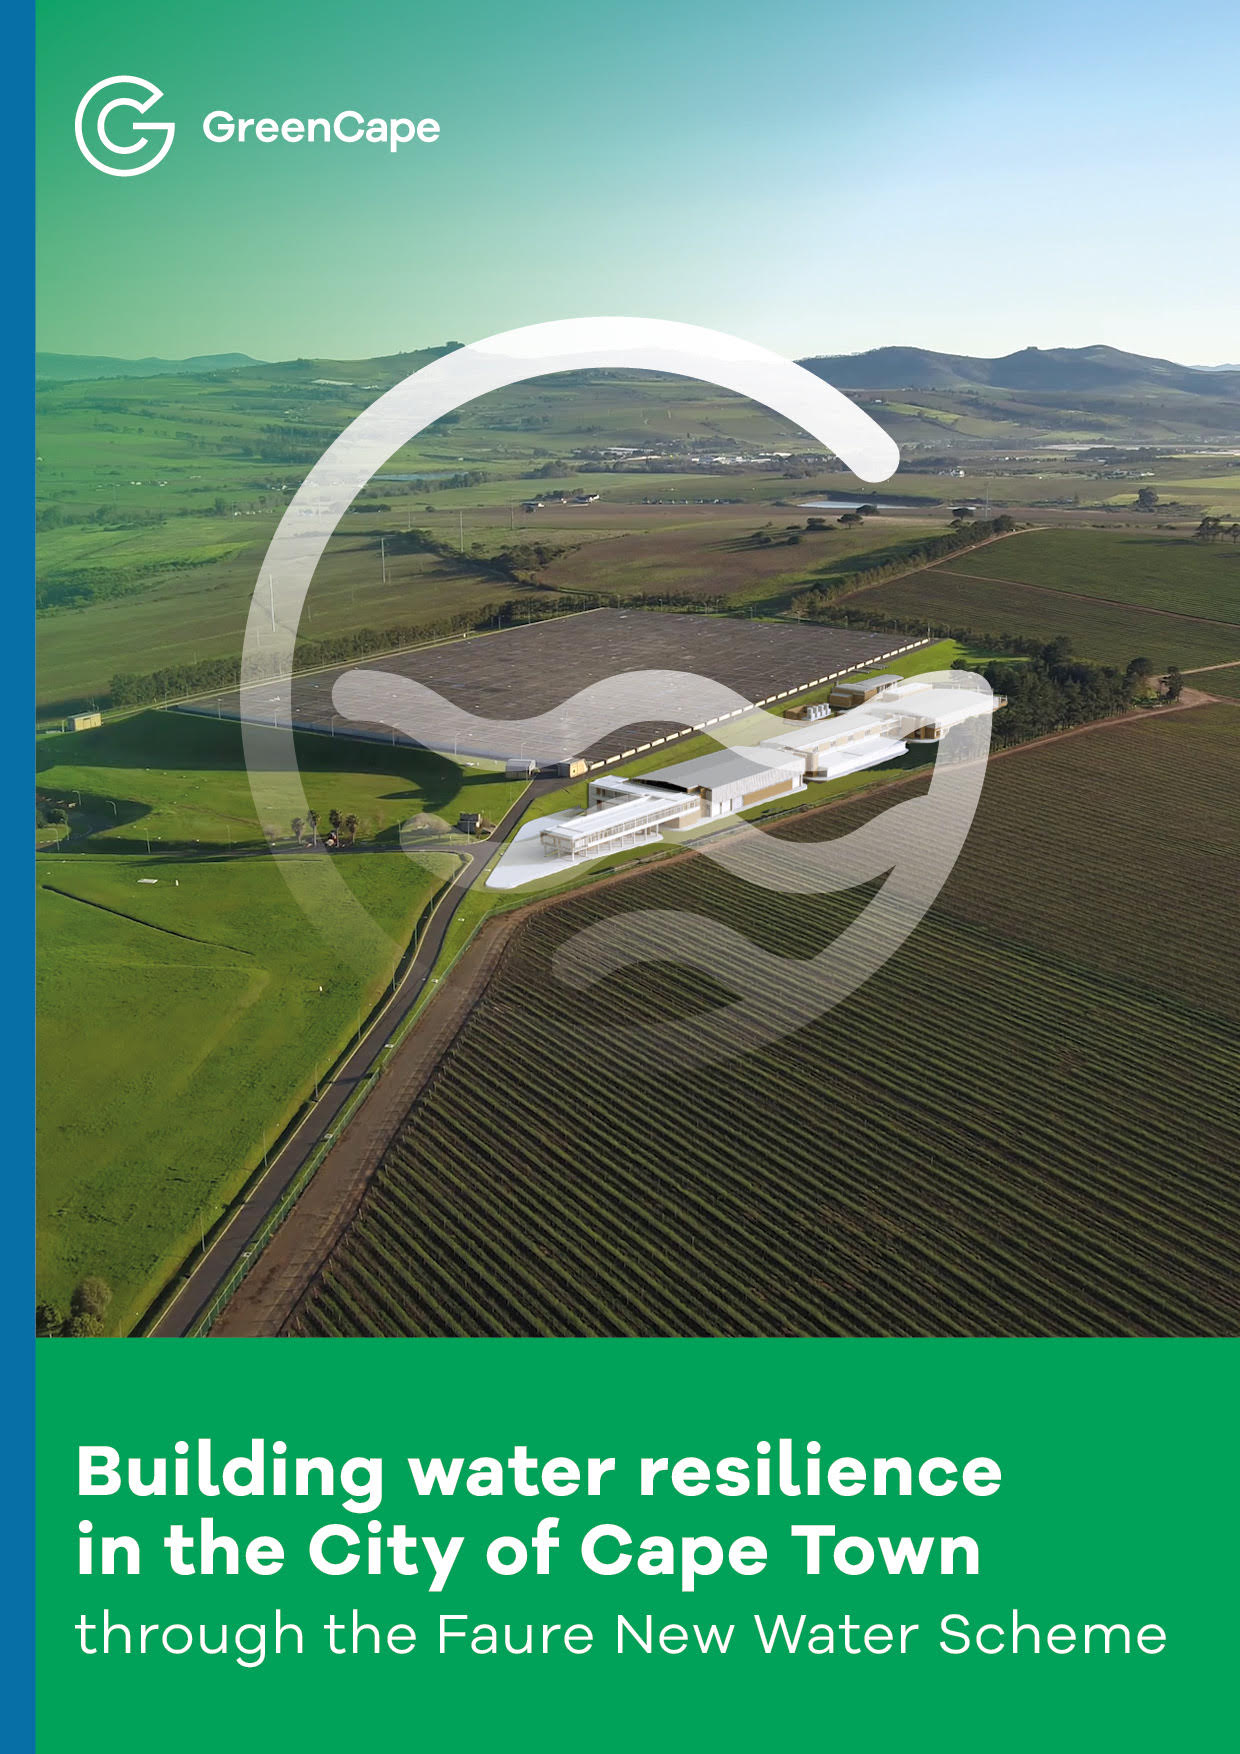 Industry brief: Building water resilience in the City of Cape Town – Faure New Water Scheme